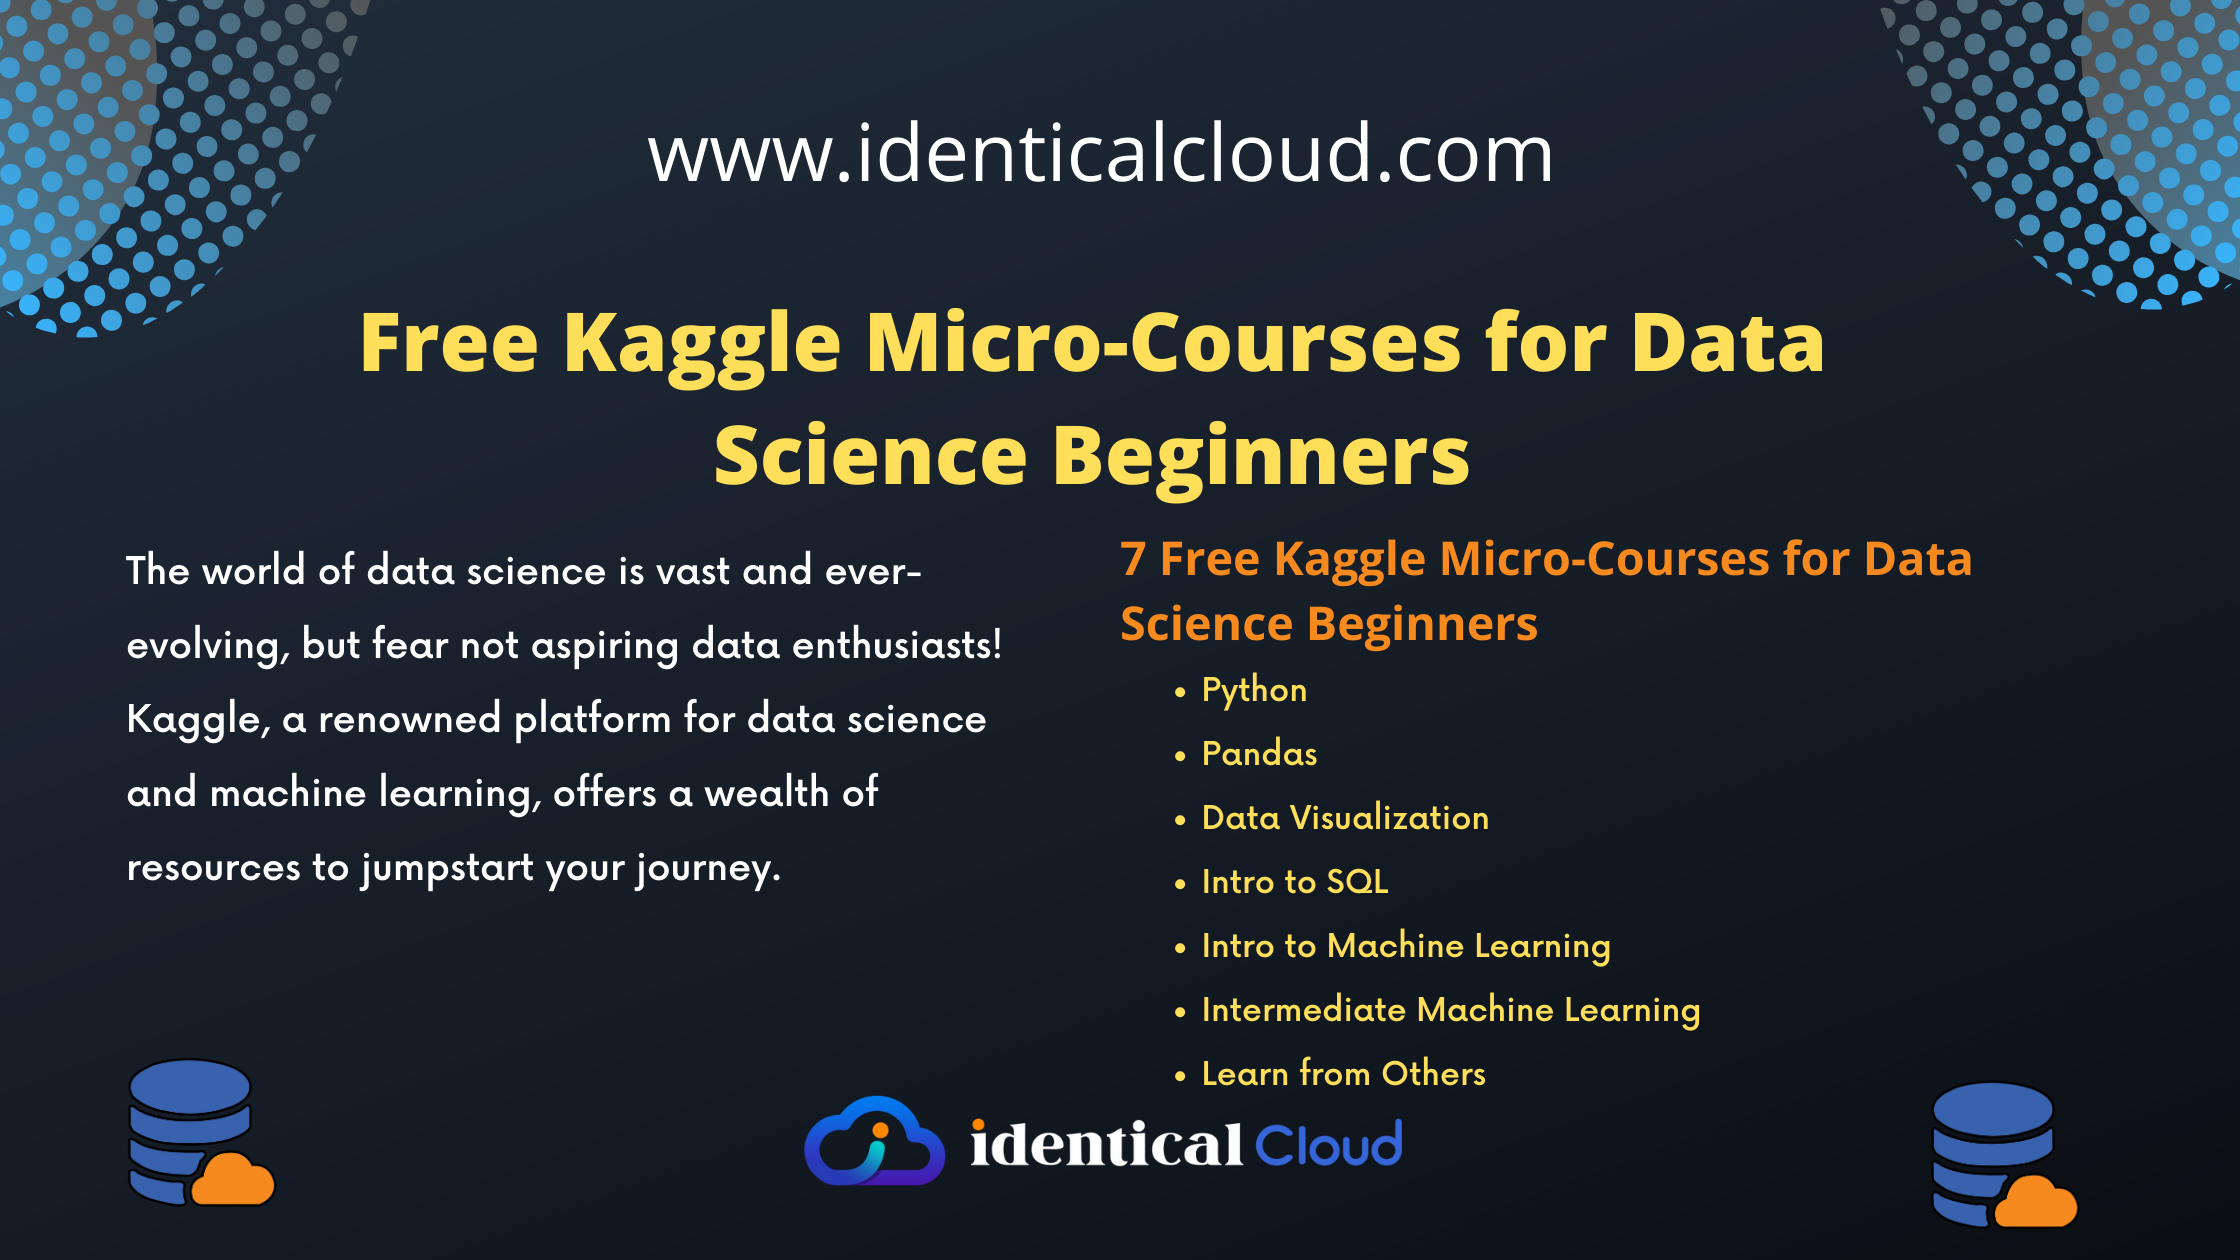 Free Kaggle Micro-Courses for Data Science Beginners - identicalcloud.com